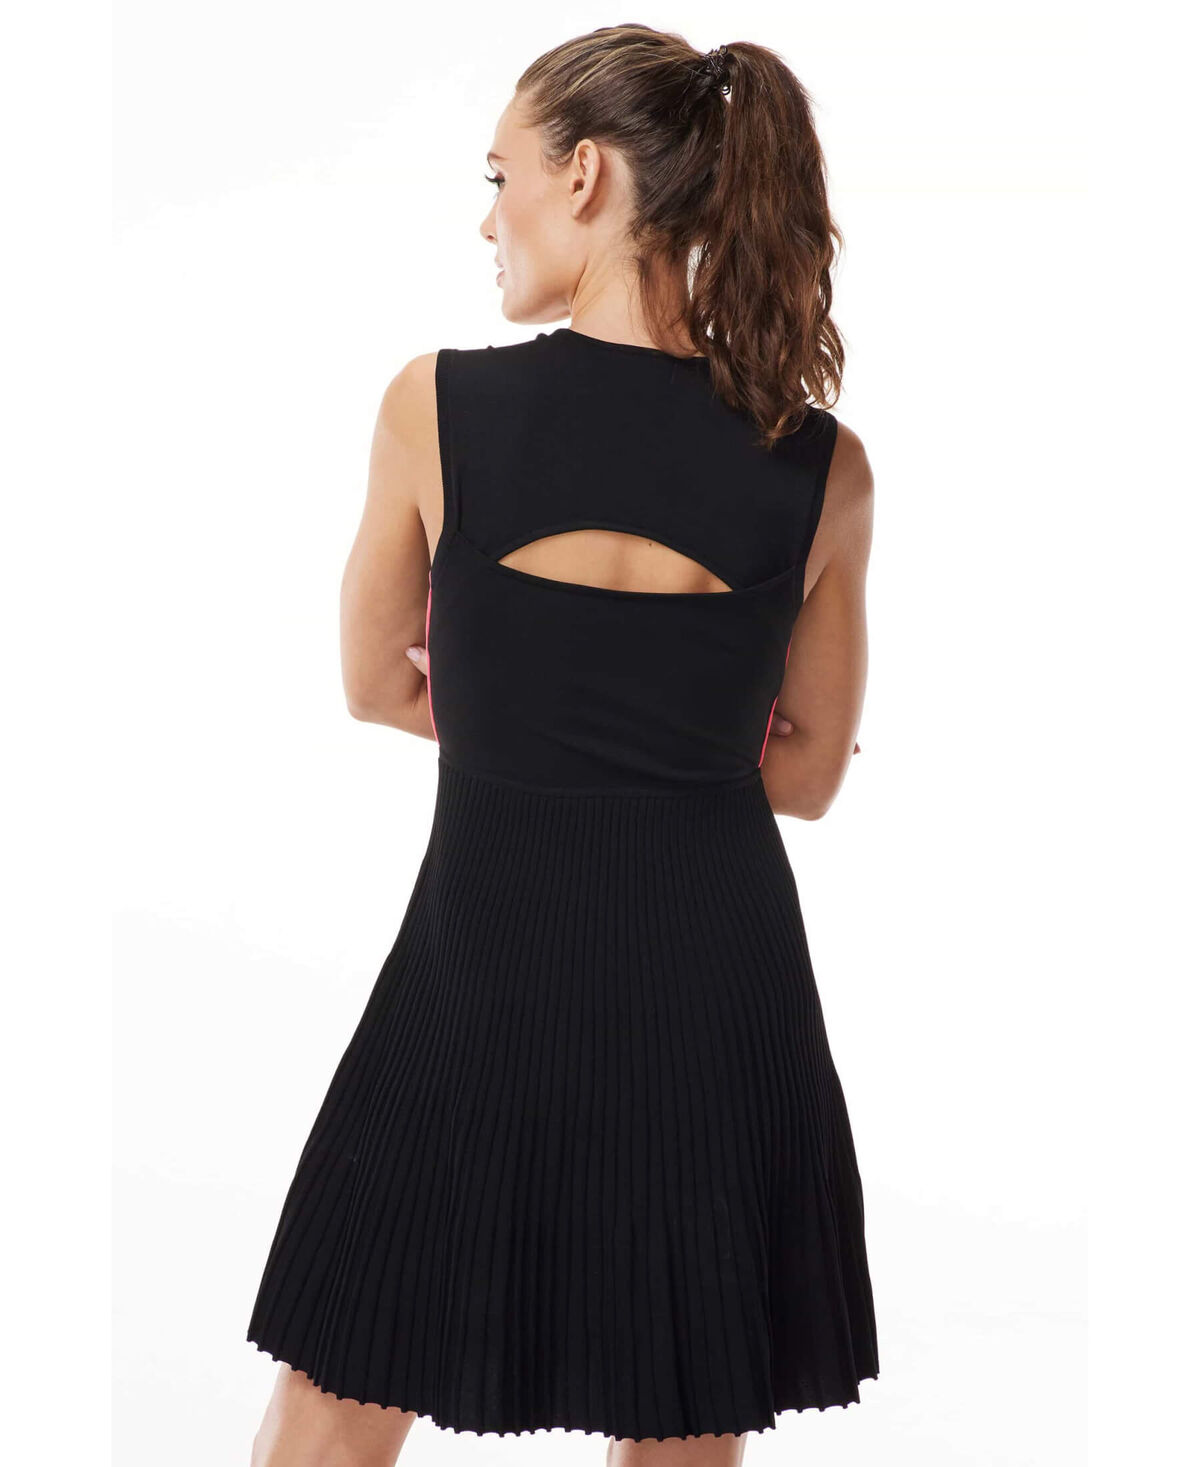 Eclipse Sleeveless Knitted Pleat Dress | Shop the Highest Quality Golf